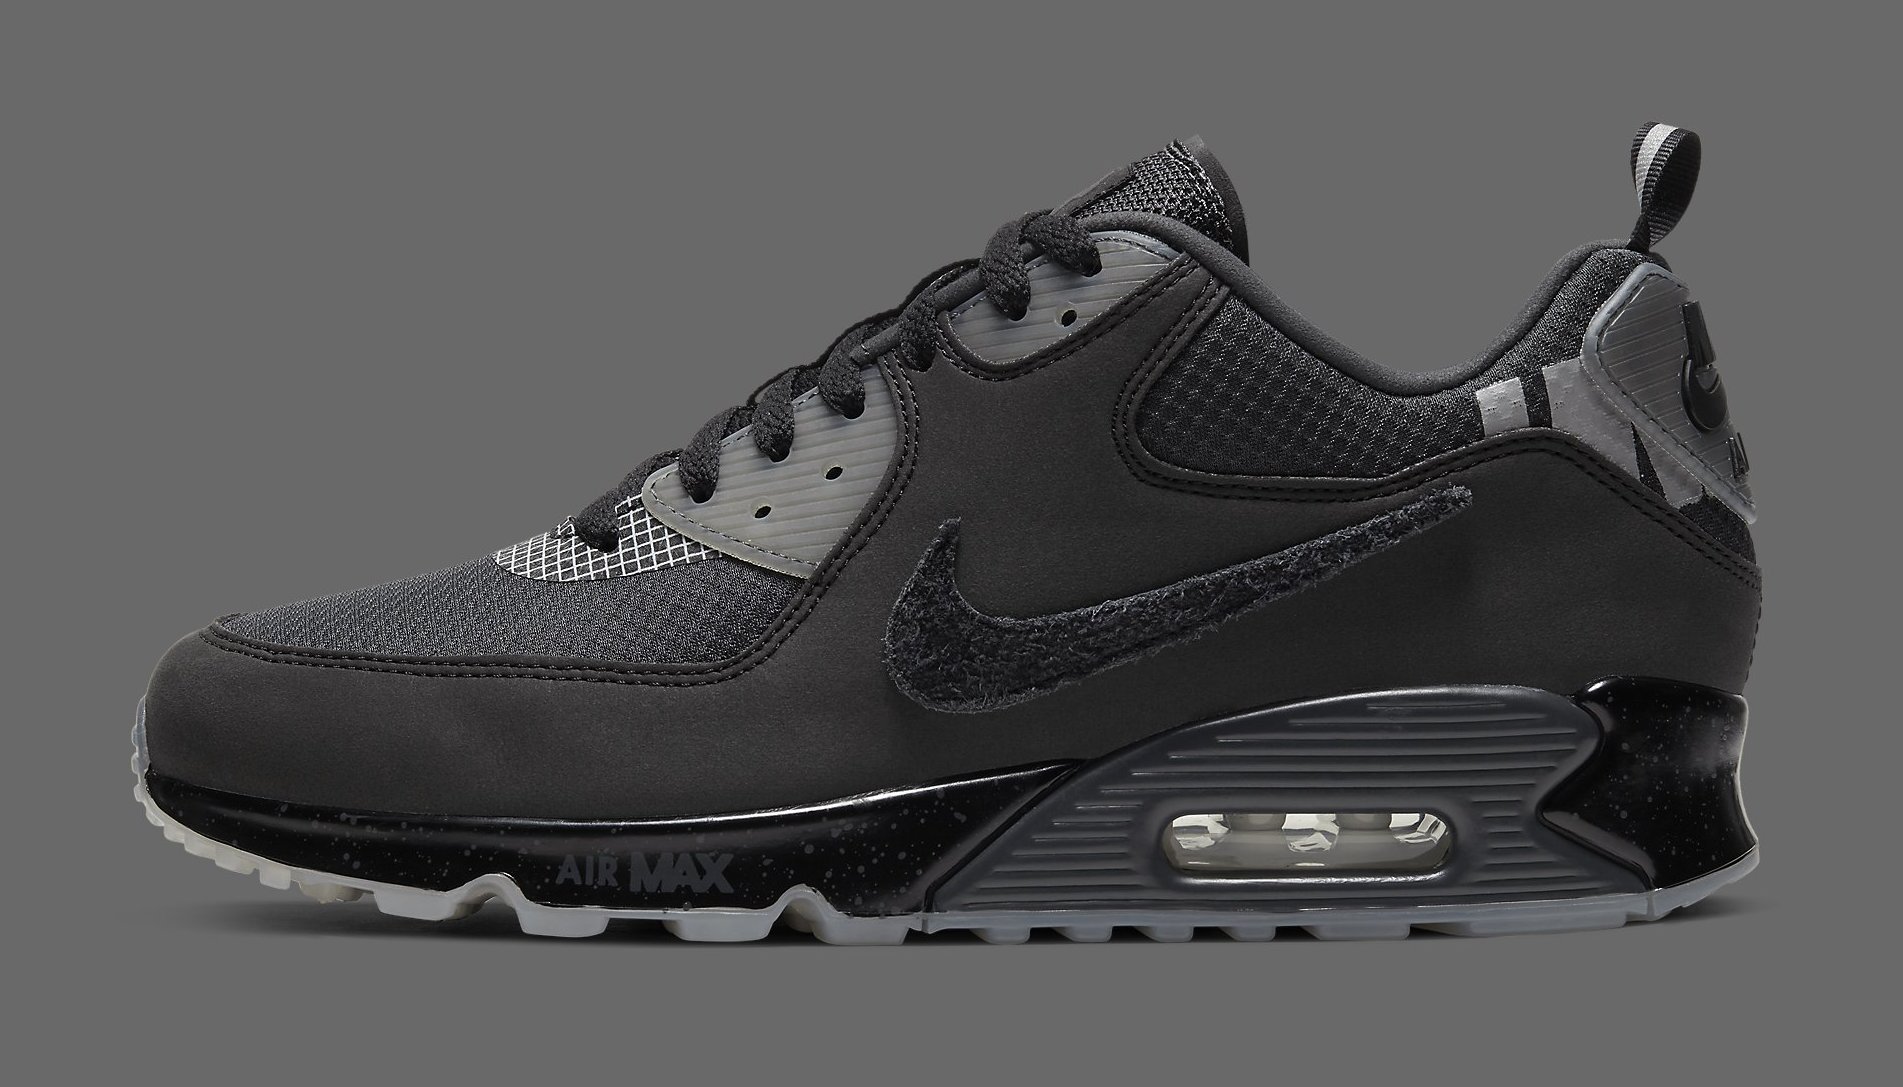 undefeated nike air max 90 black cq2289 002 lateral